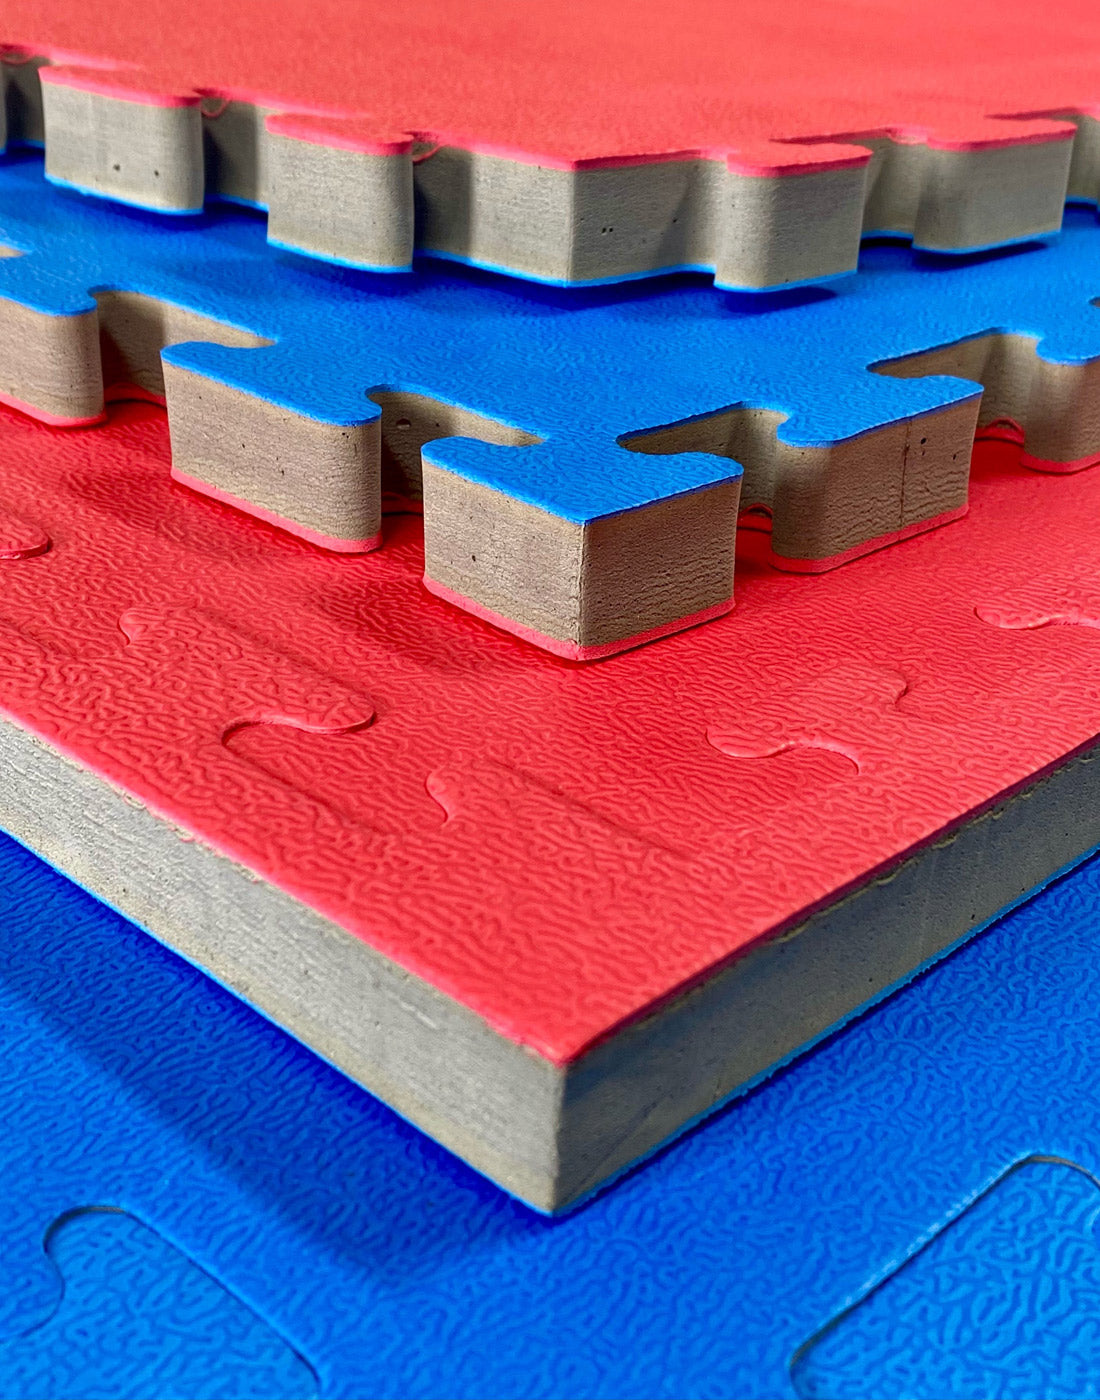 Hatashita Premium Puzzle Mats - 25mm Blue and Red Stacked - Best Puzzle Mats in Canada